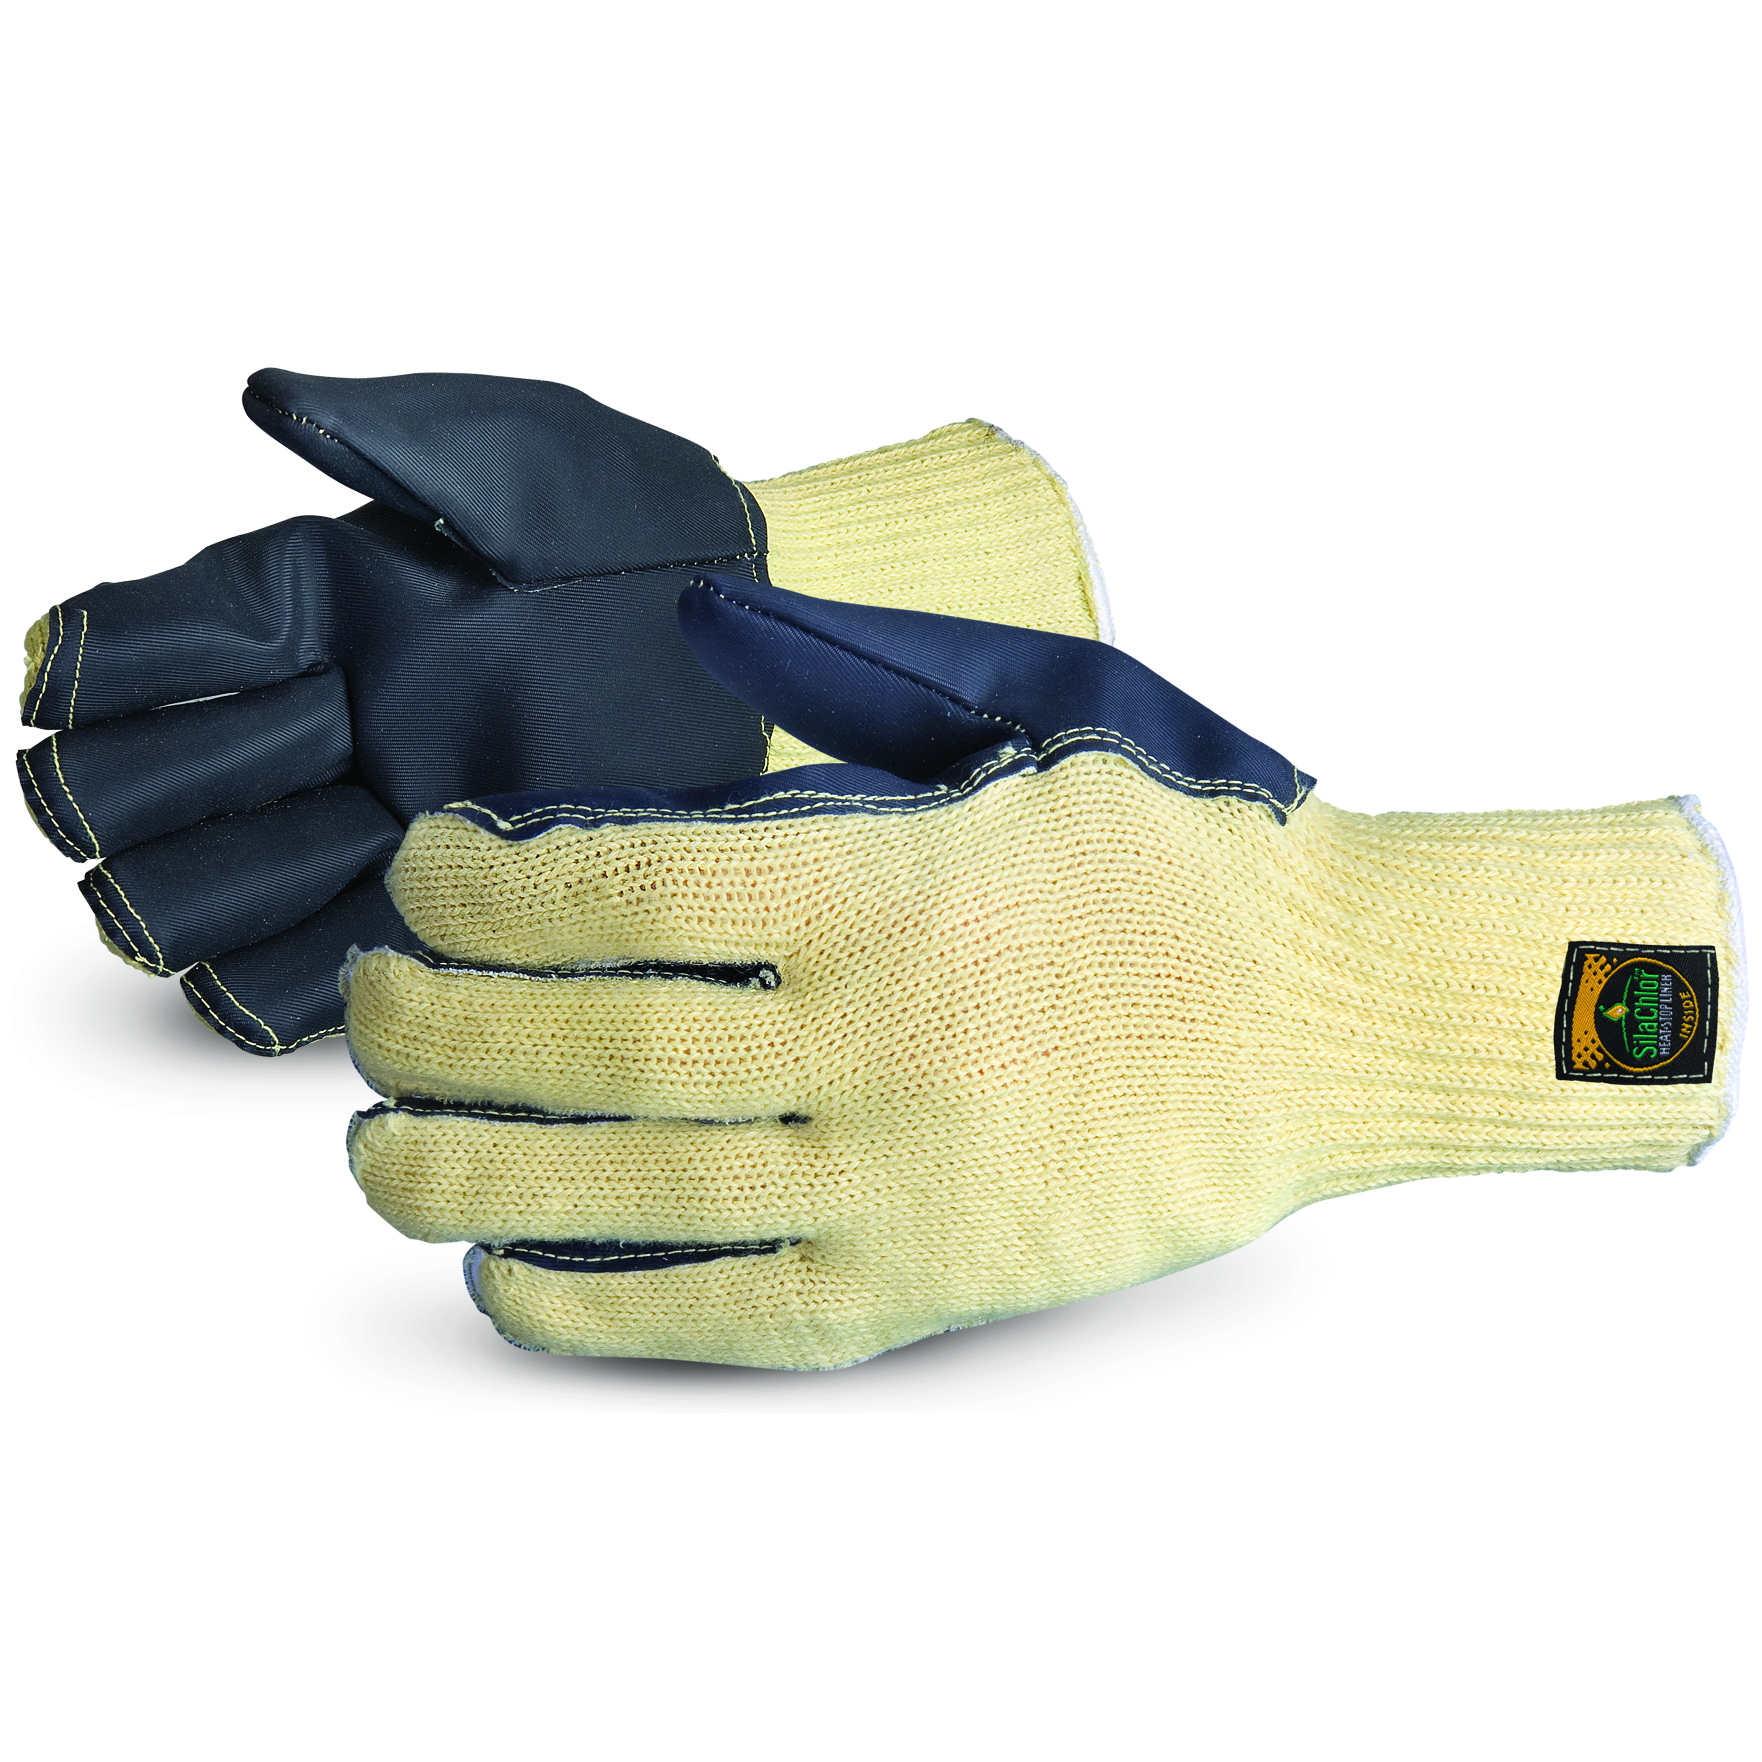 Heat-Resistant Gloves with SilaChlor&trade; and Temperbloc&trade;, Made With DuPont&trade; Kevlar&reg; Fiber